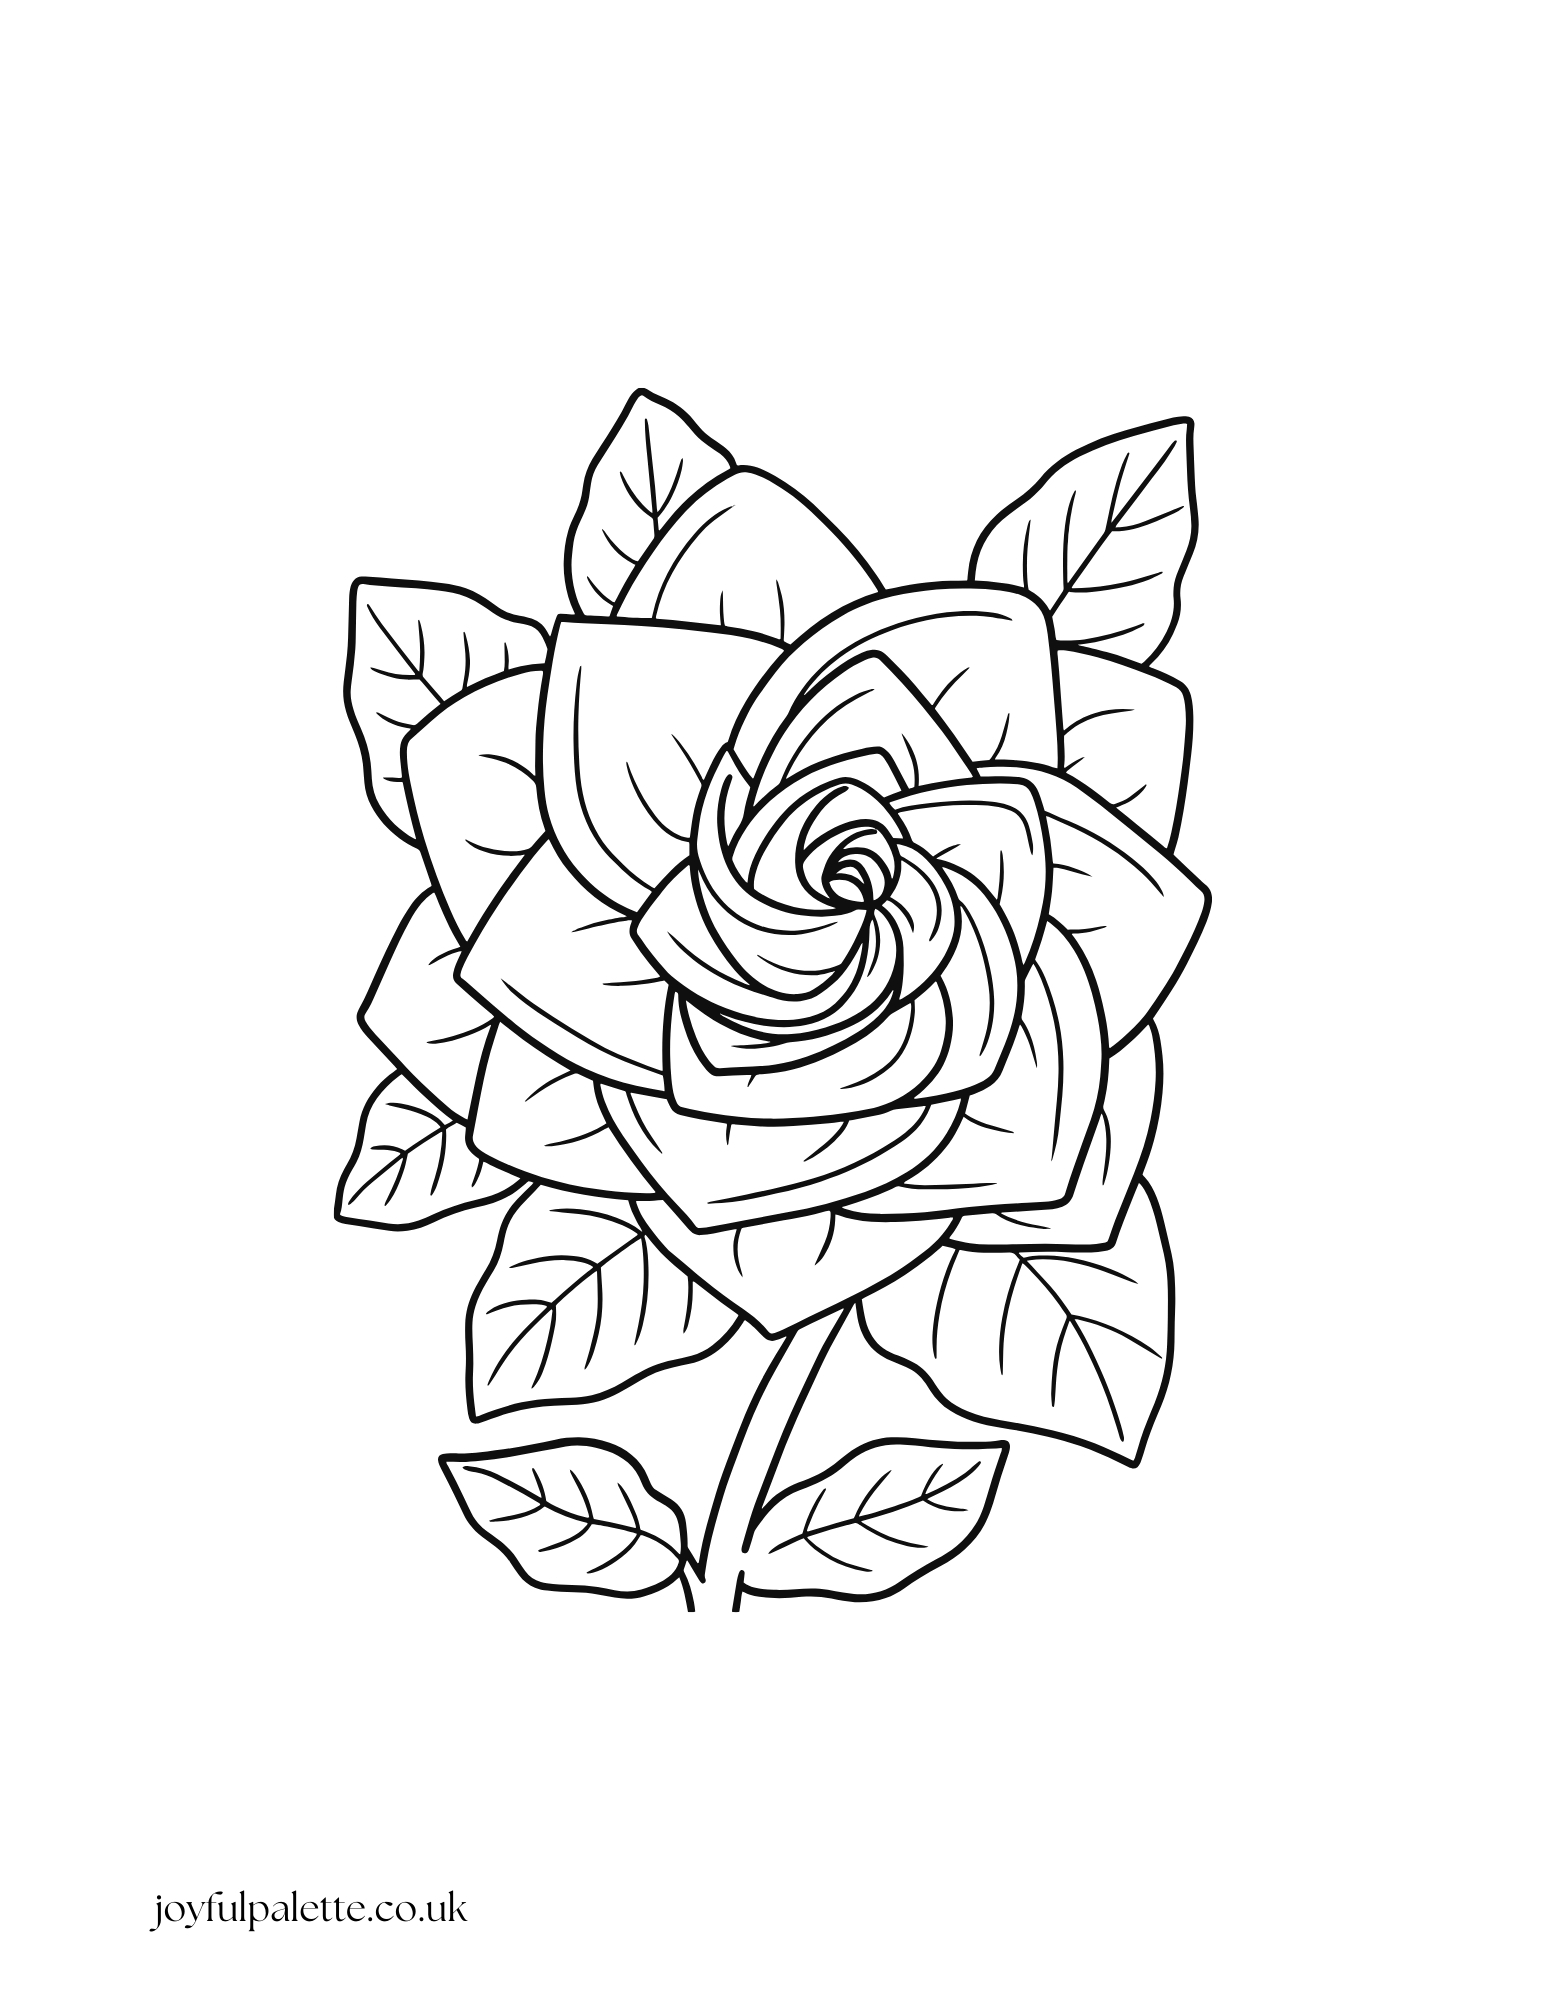  Easy Flower Coloring Page